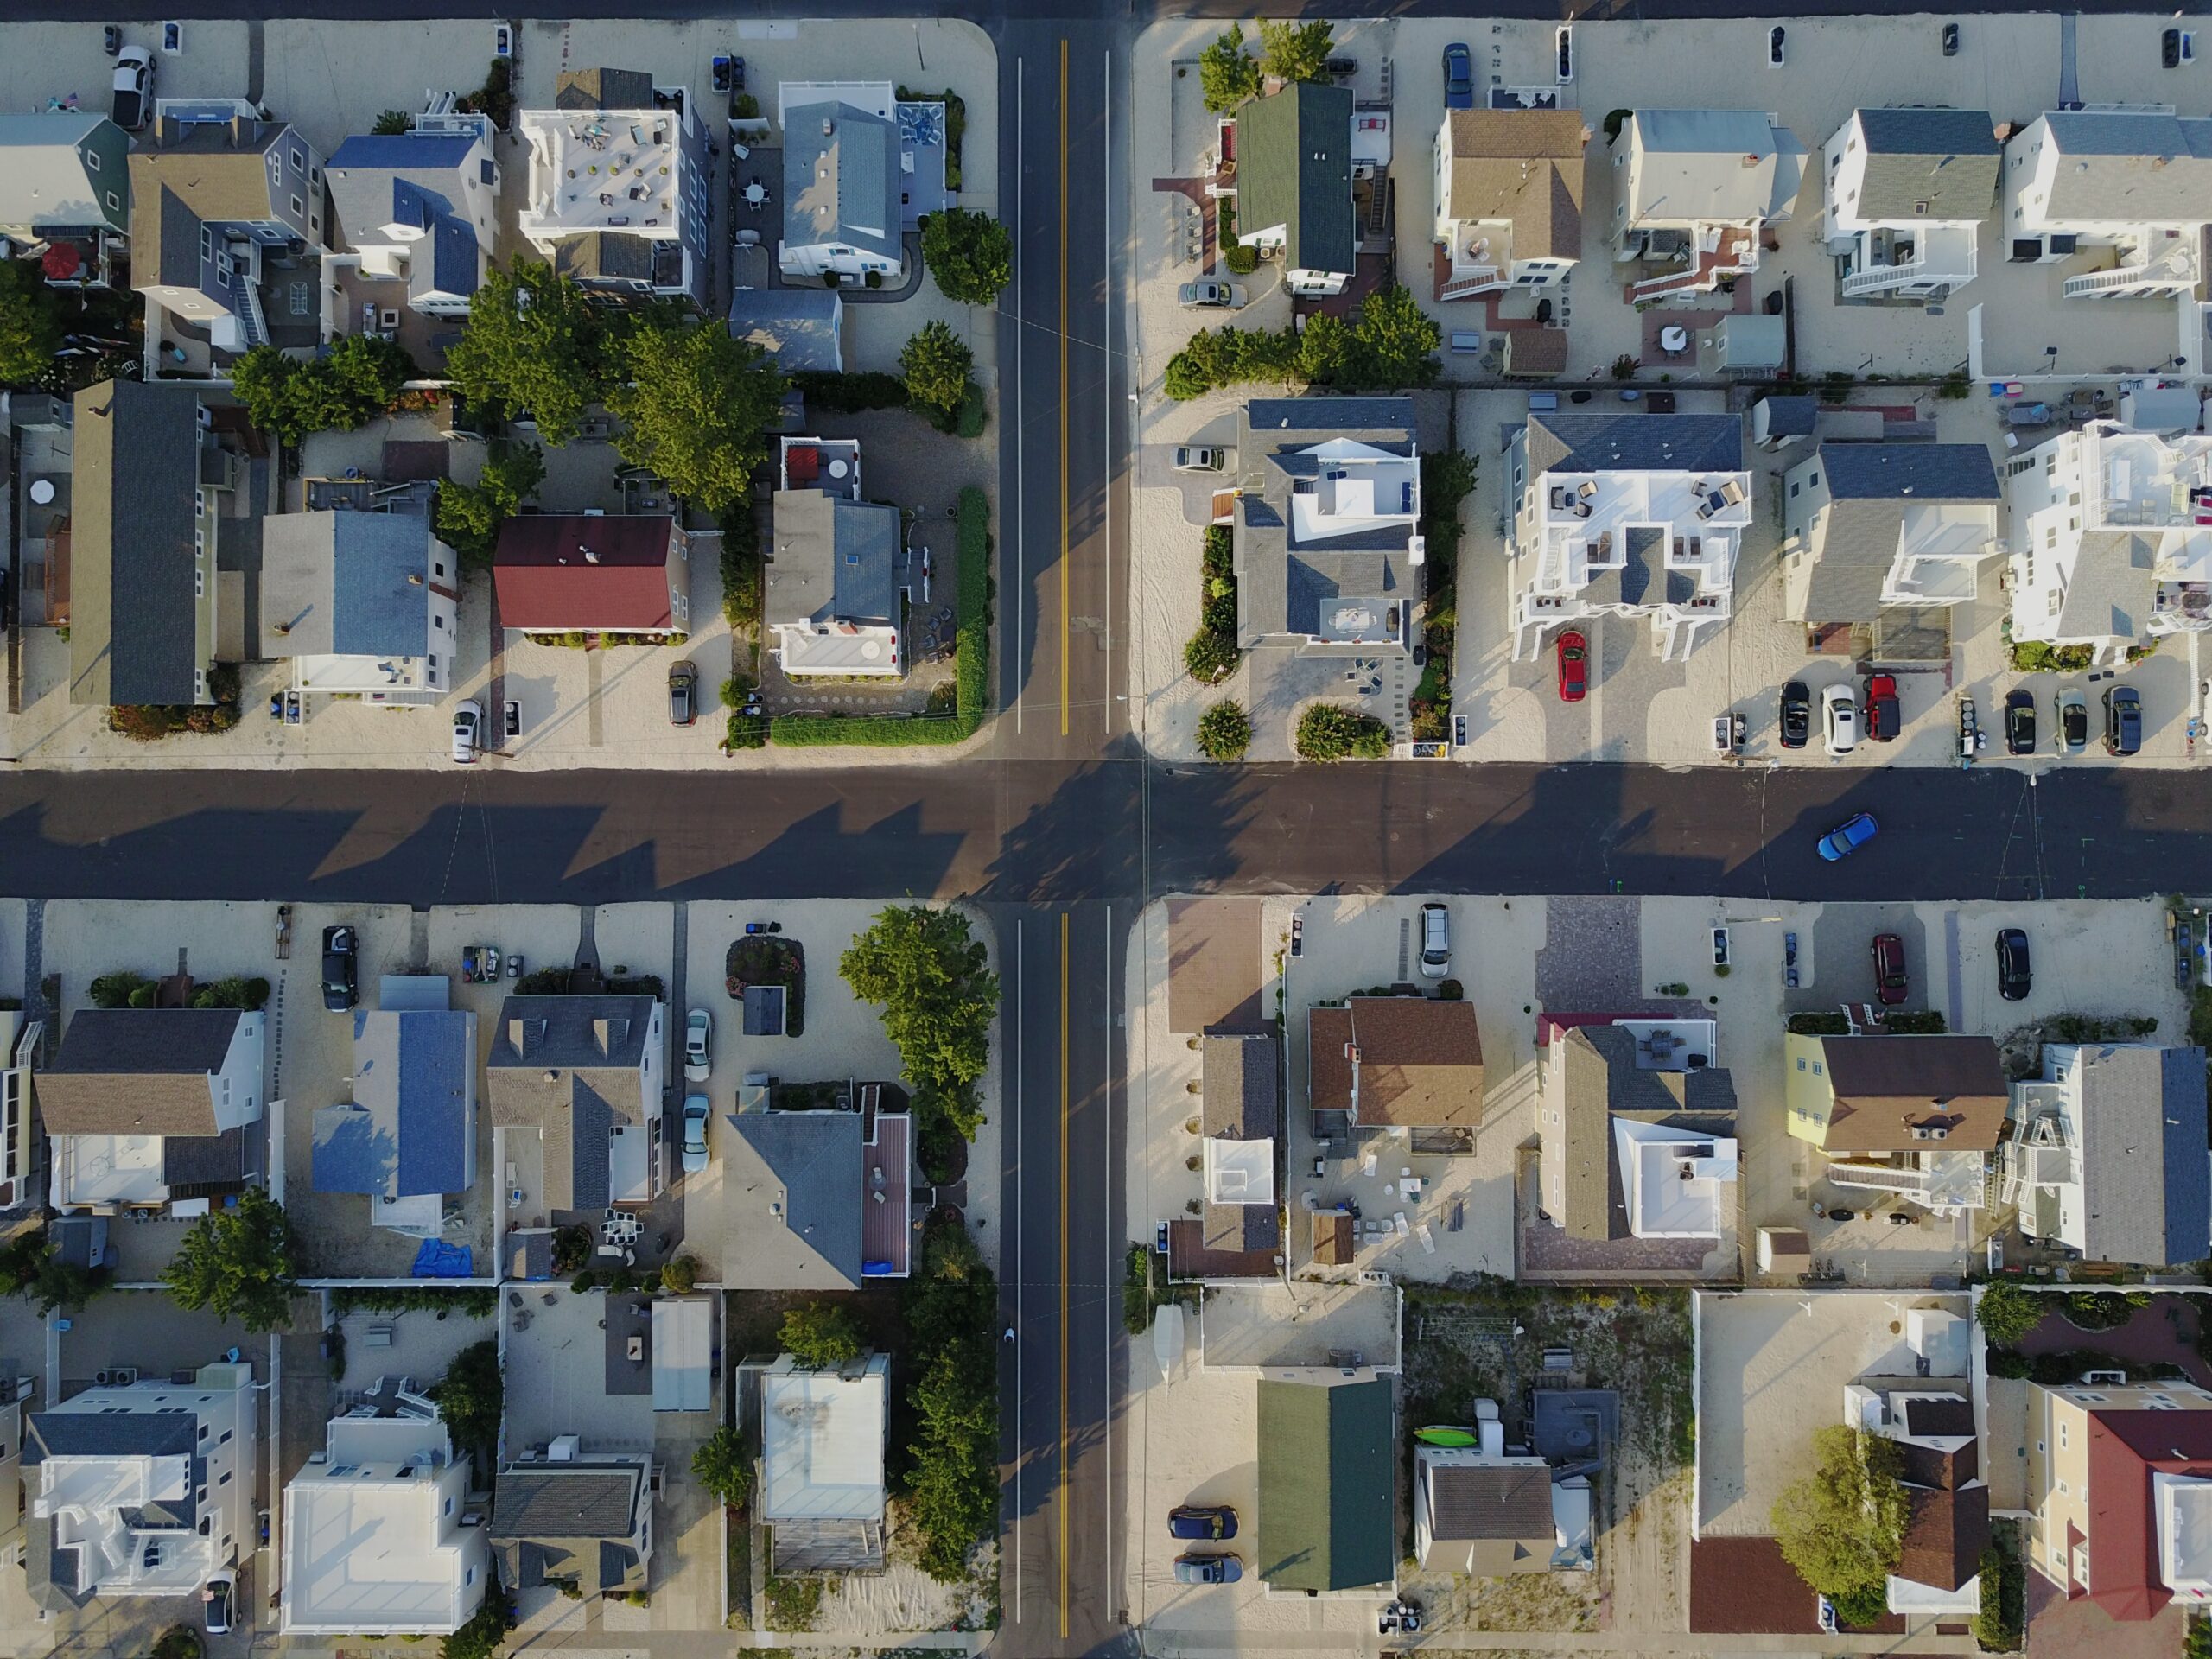 Aerial shot showing four blocks of row homes